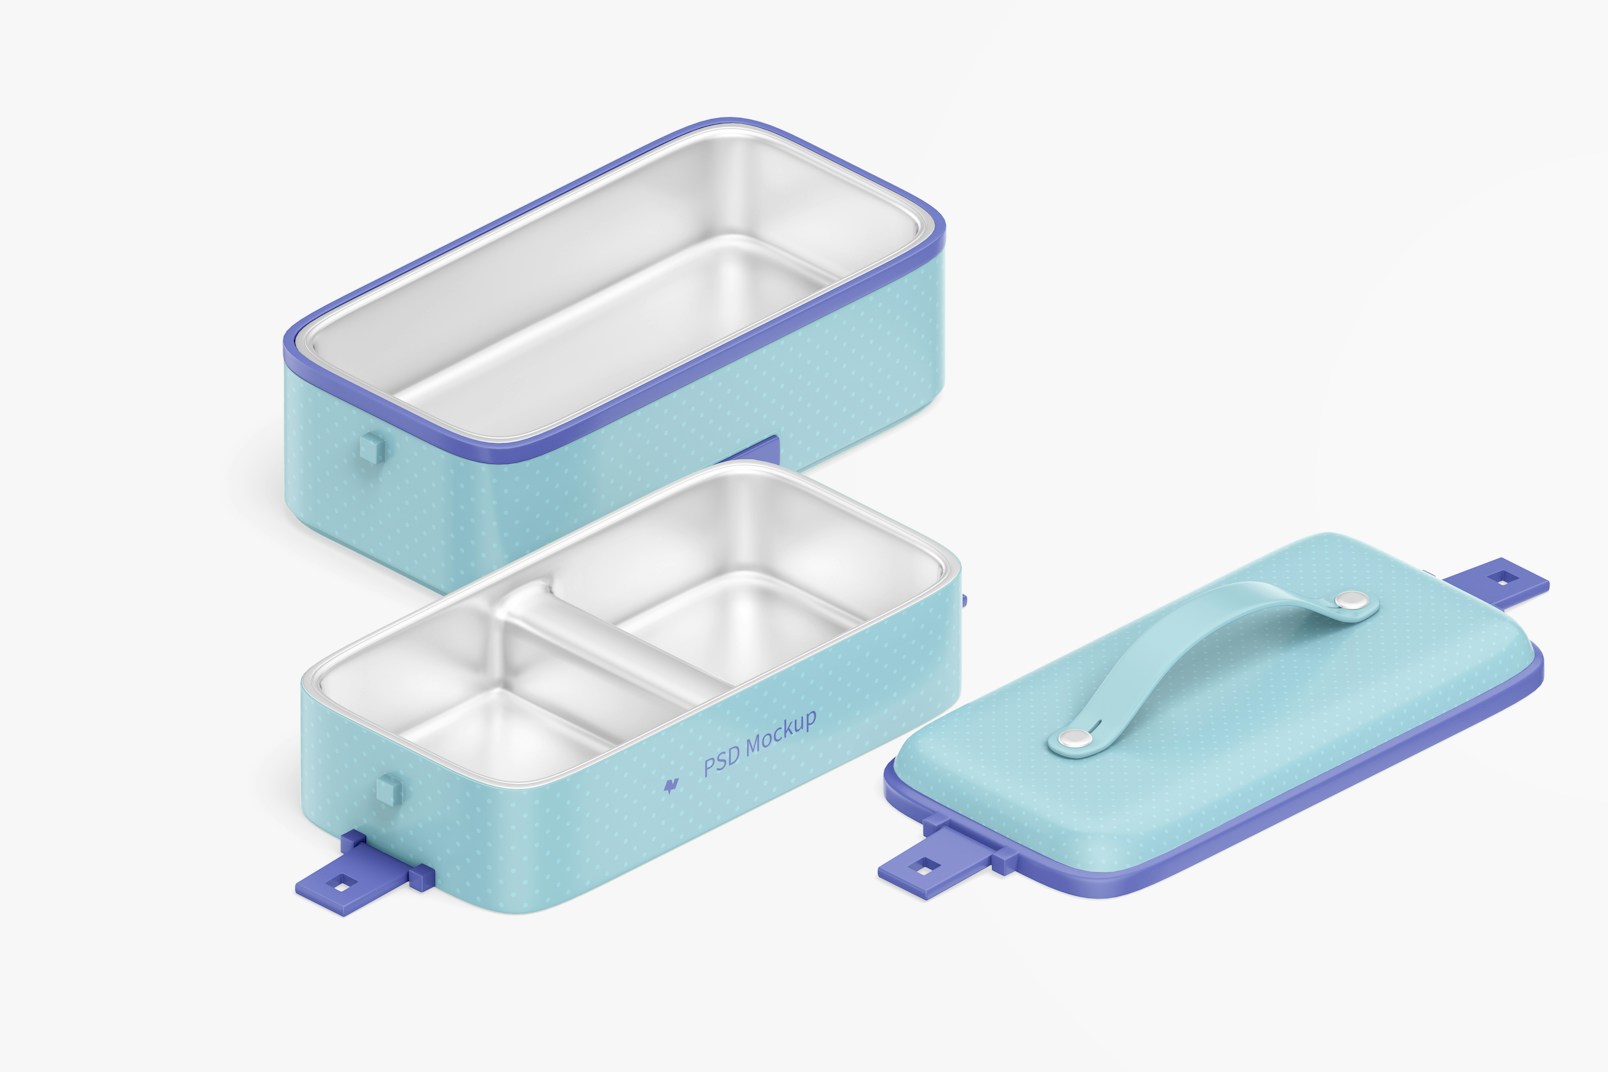 Portable Electric Lunch Box Mockup, Isometric Left View